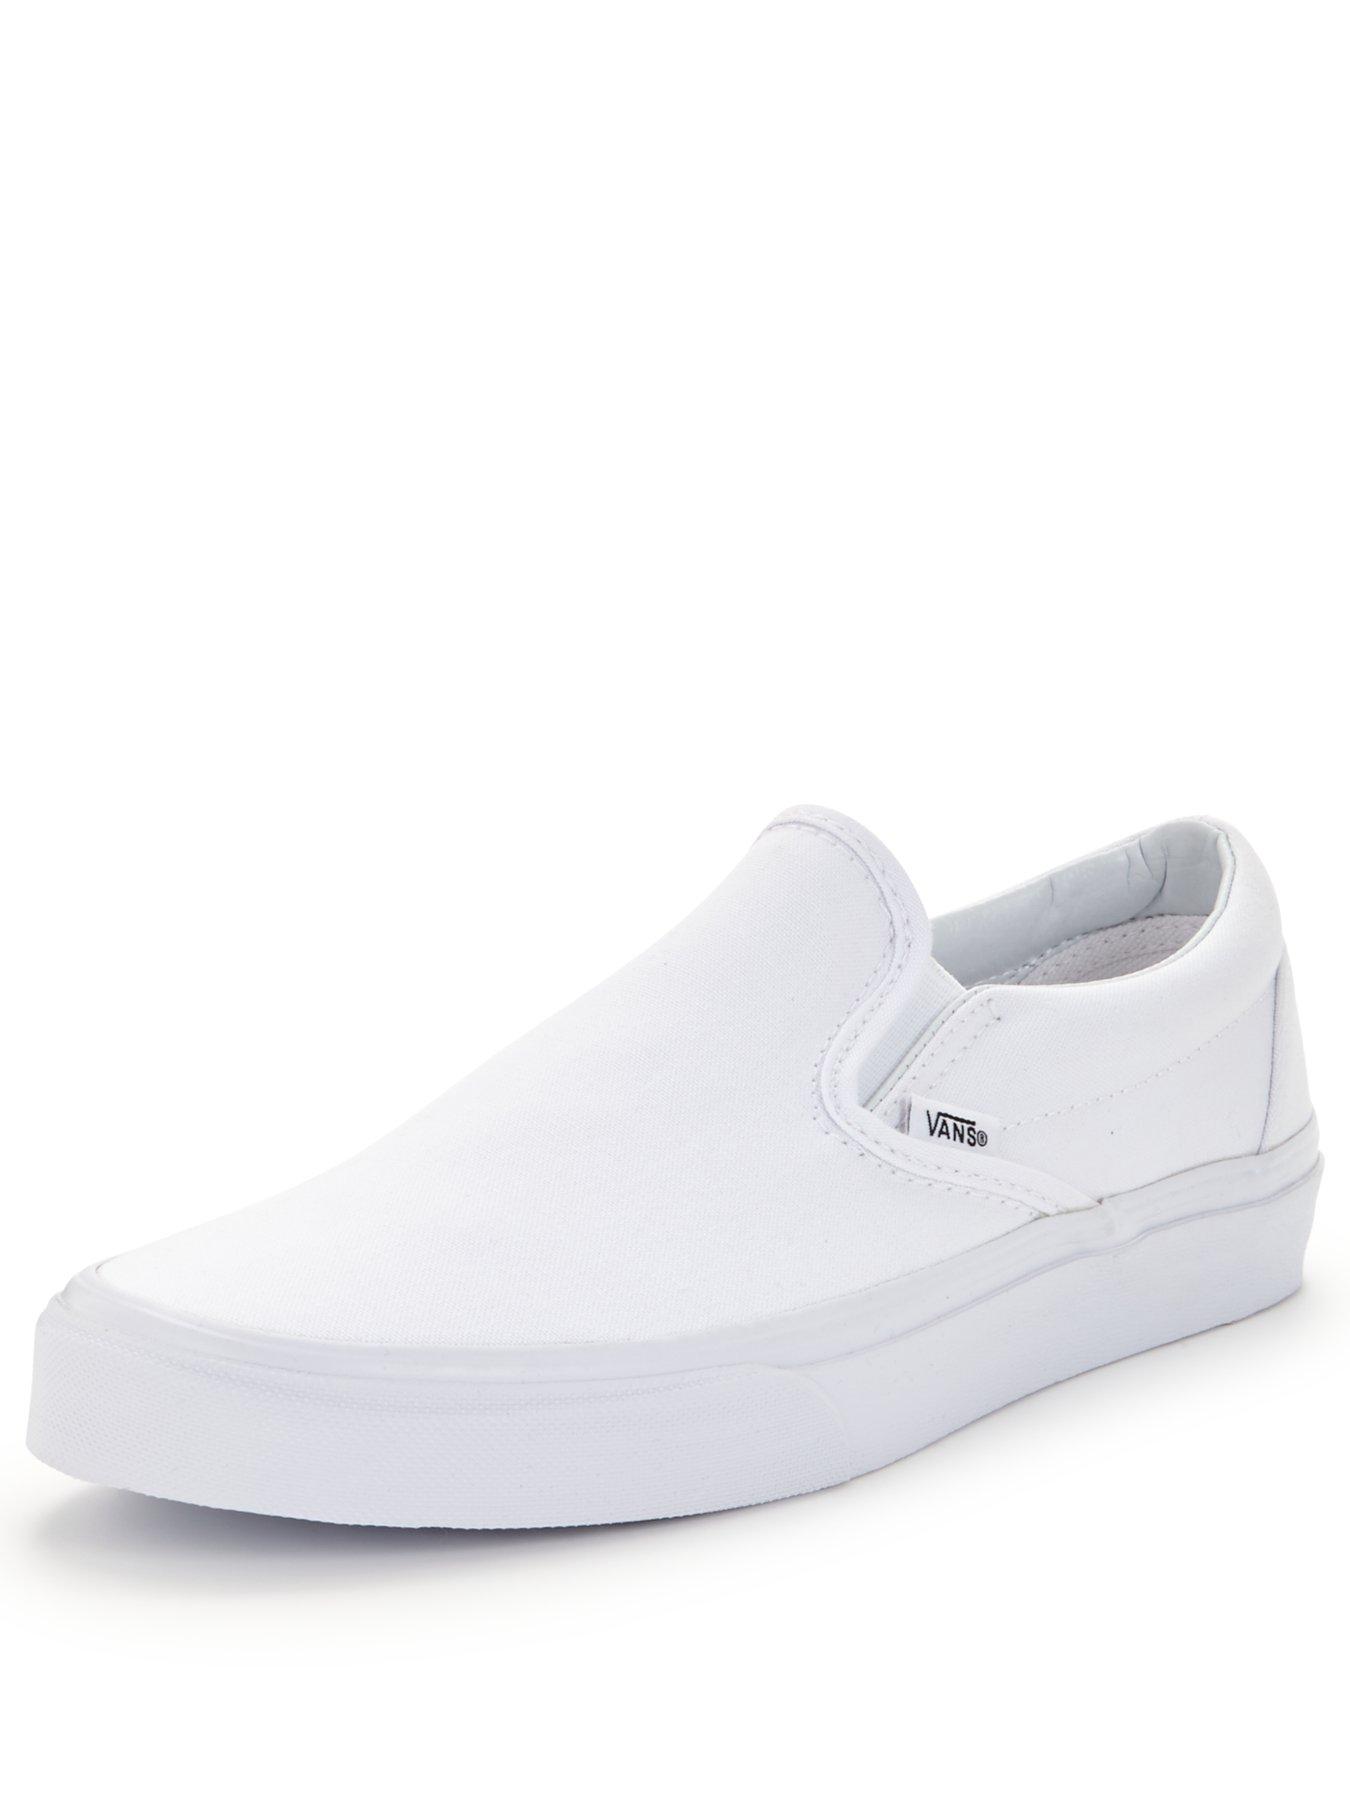 Trainers Classic Slip-On - White